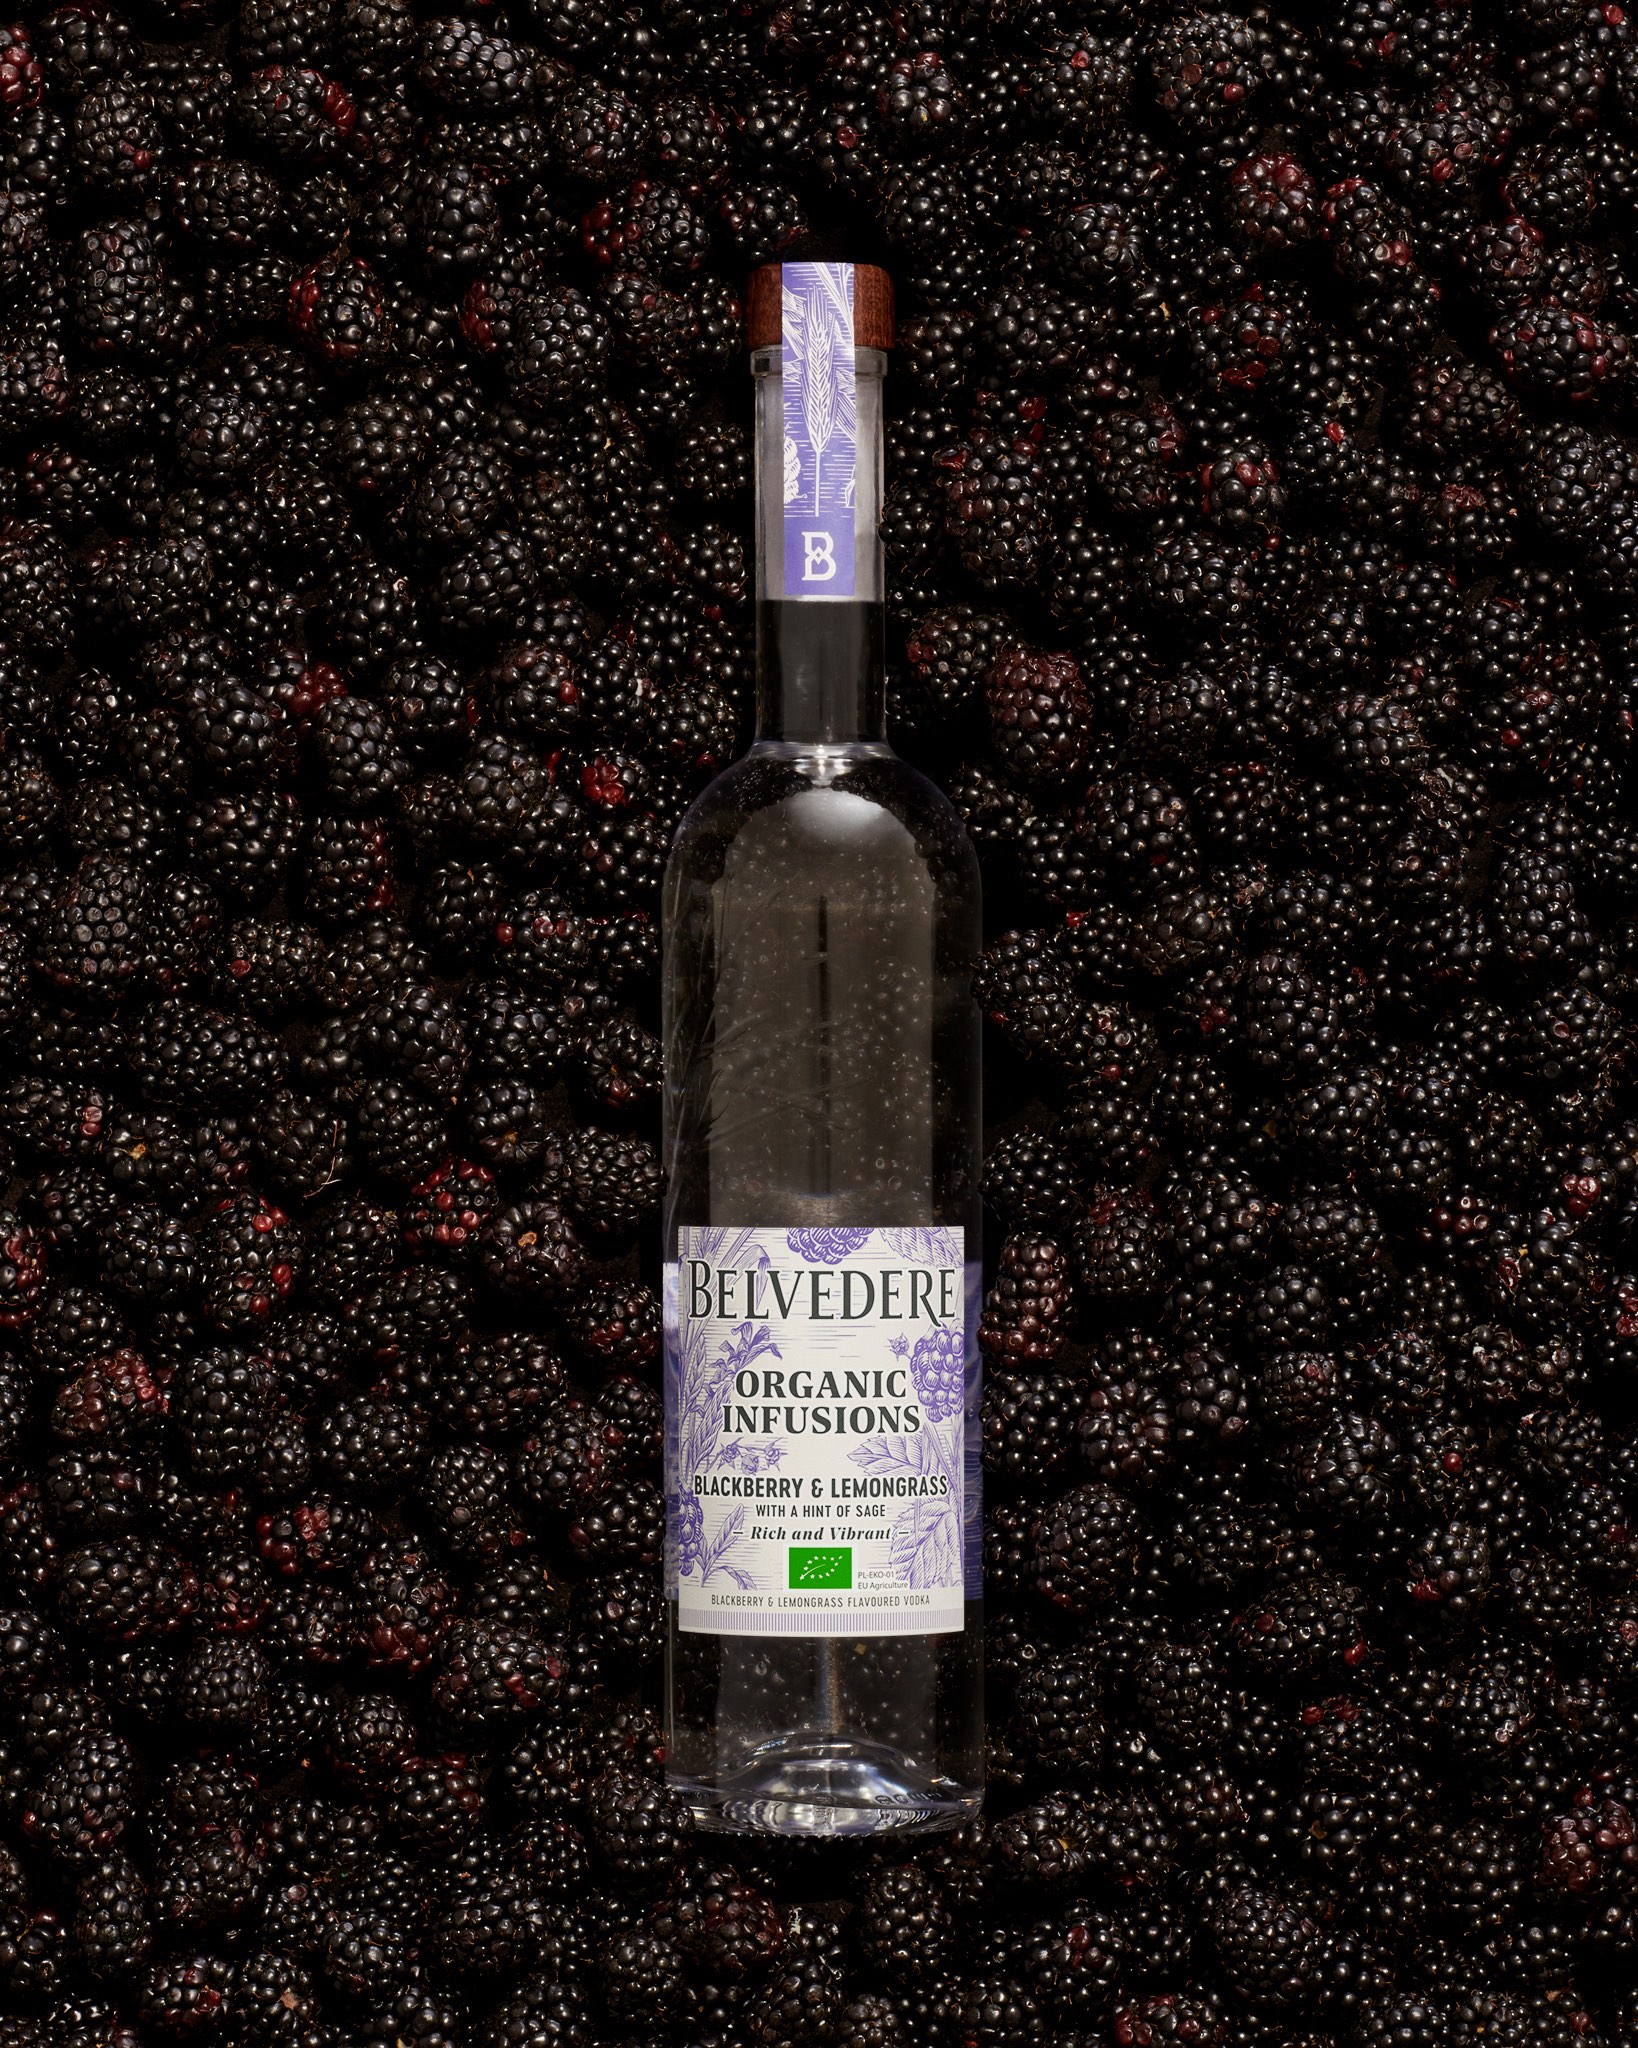 Belvedere Organic Infusions - Wengler Châteaux & Domaines